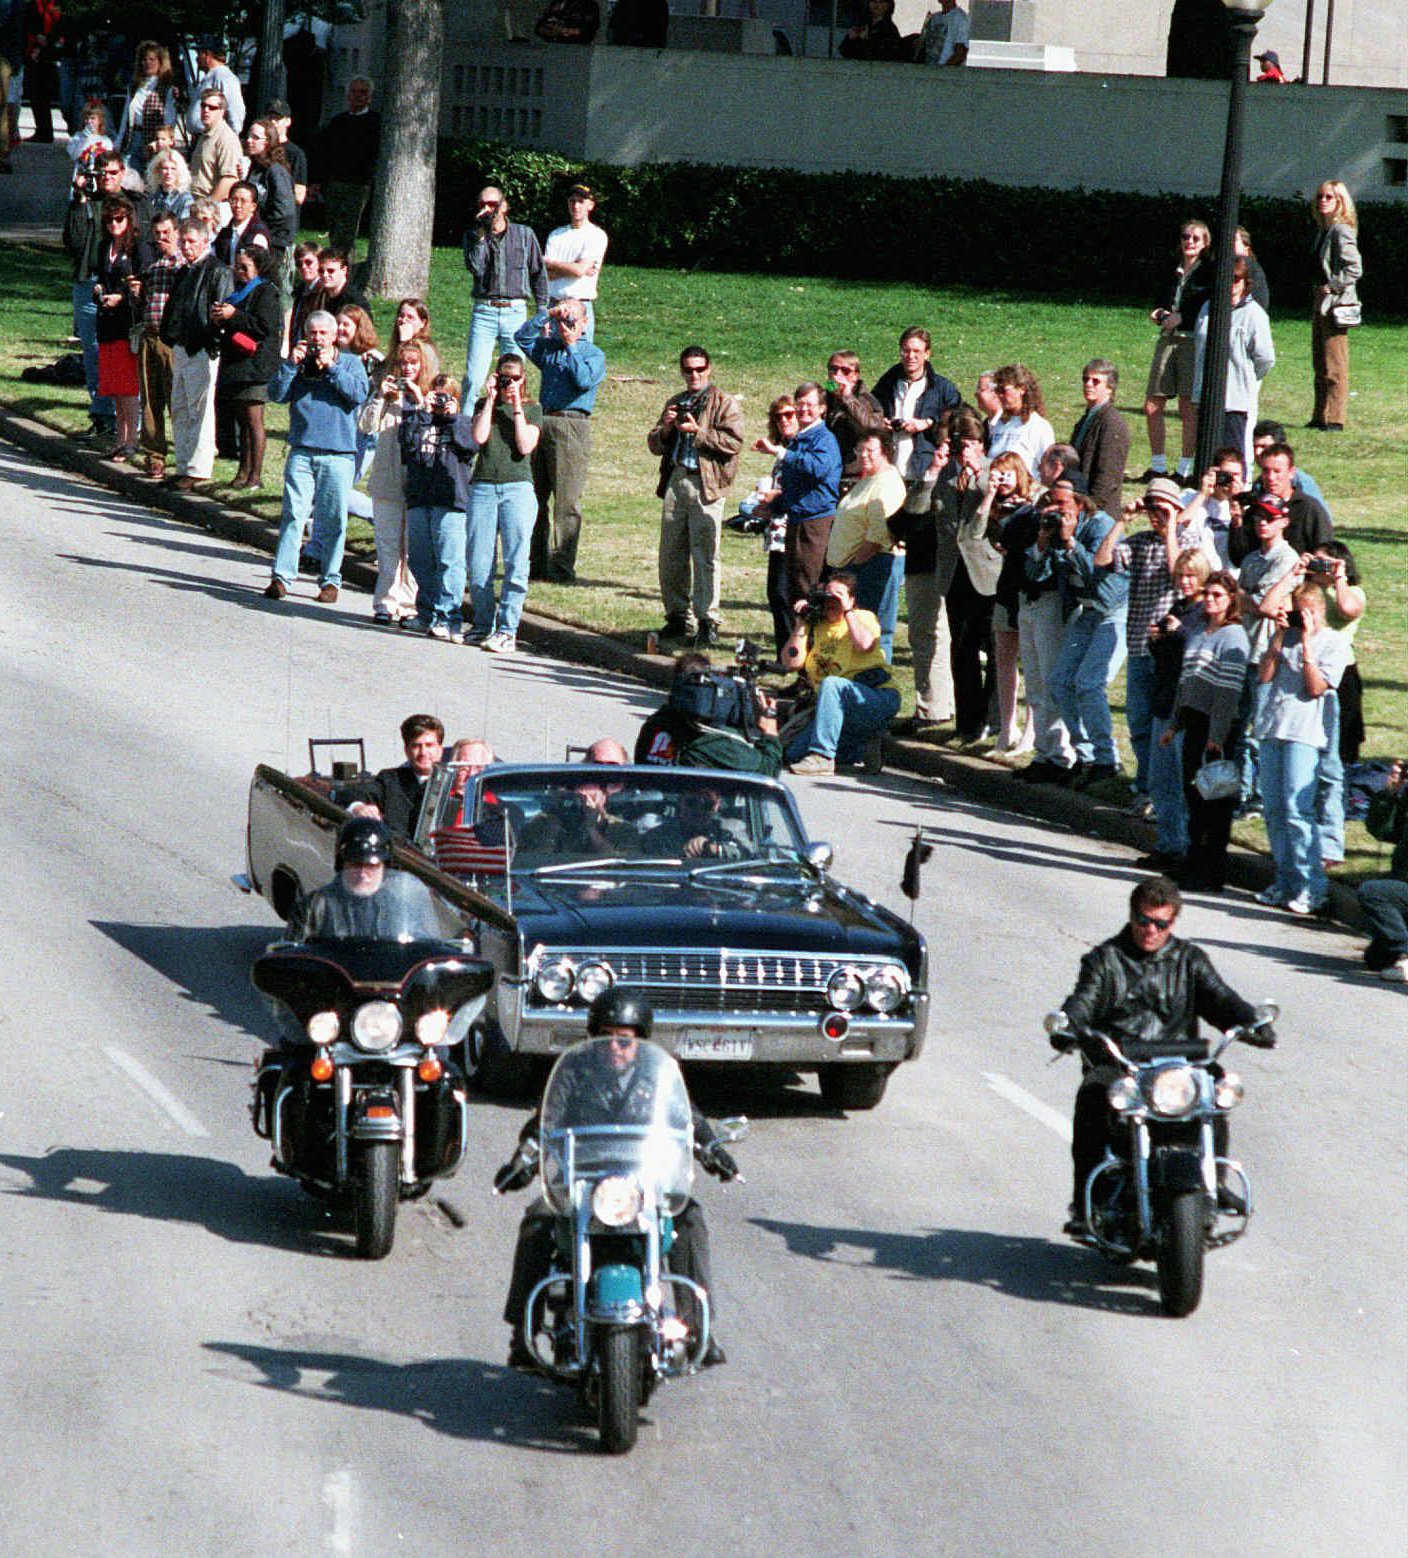 Onlookers line the street as a re-creation of the motorcade of President John F. Kennedy drives through Dealey Plaza in downtown Dallas on the anniversary of the 1963 assasination of Kennedy, Saturday, Nov. 22, 1997. (AP Photo/Dallas Morning News, Lisa LeVrier)